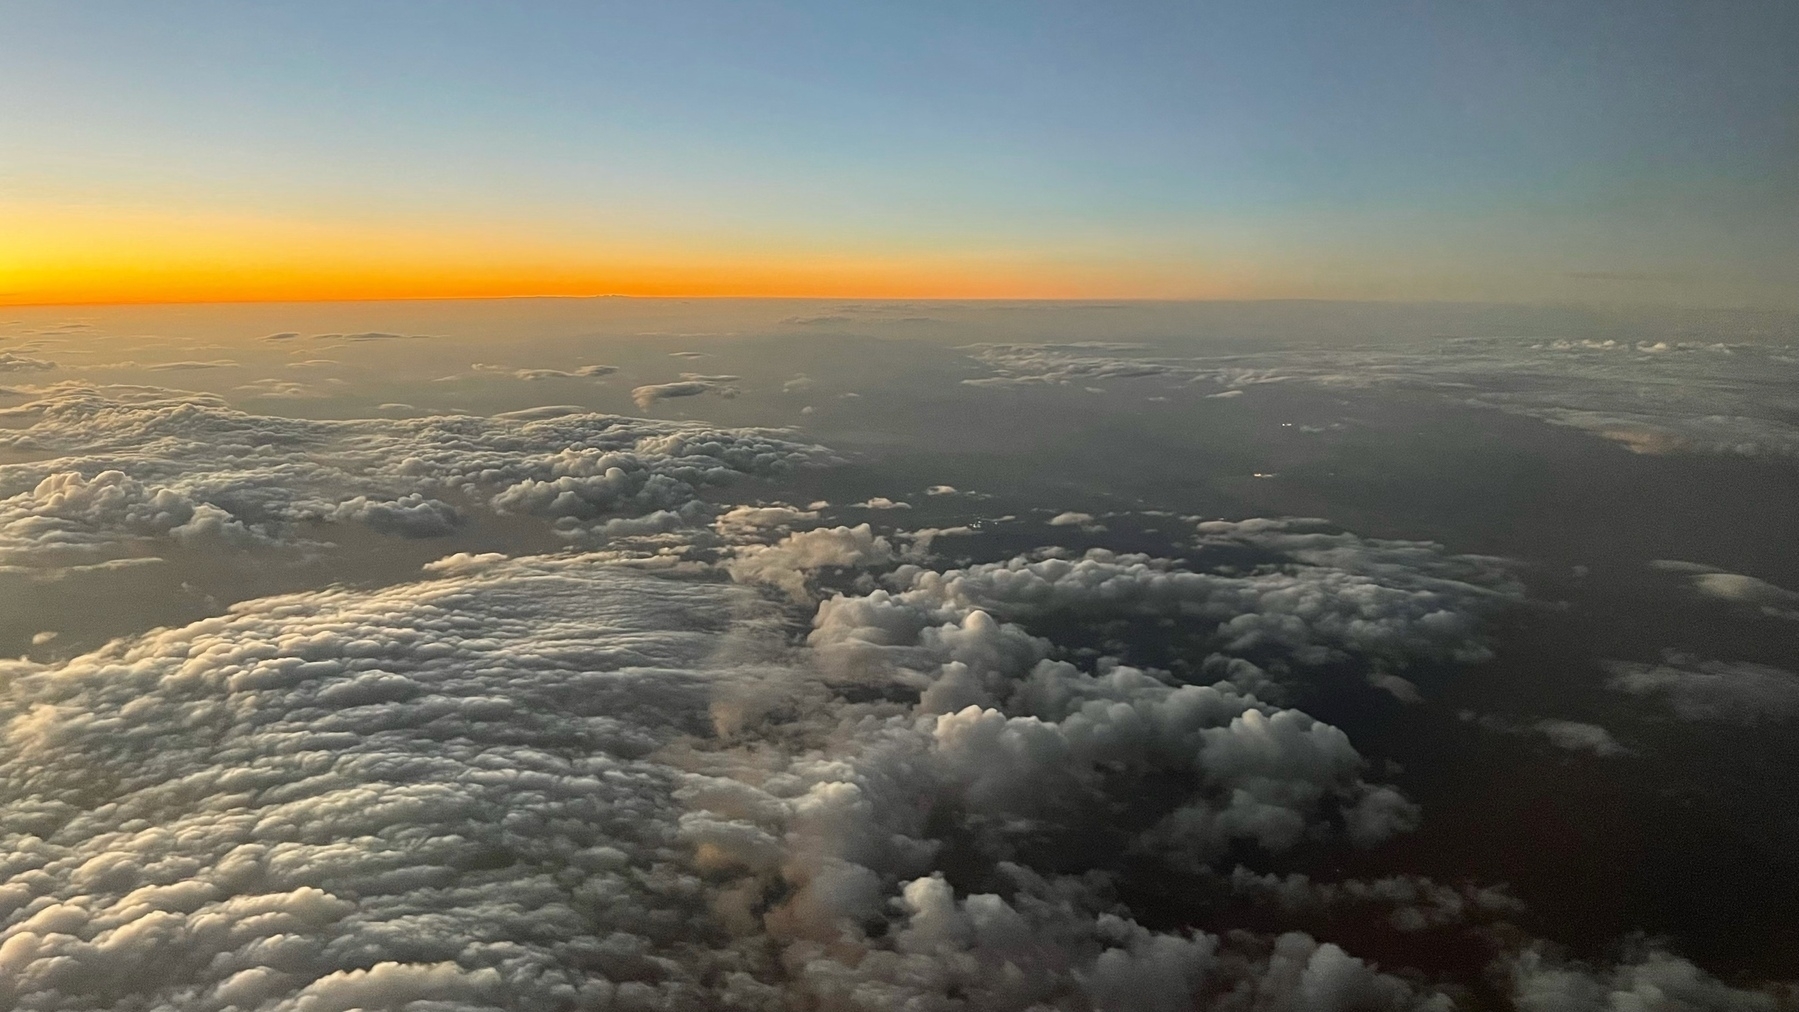 view out an aiplane window at sunset with clouds and an orange ribbon at the horizon